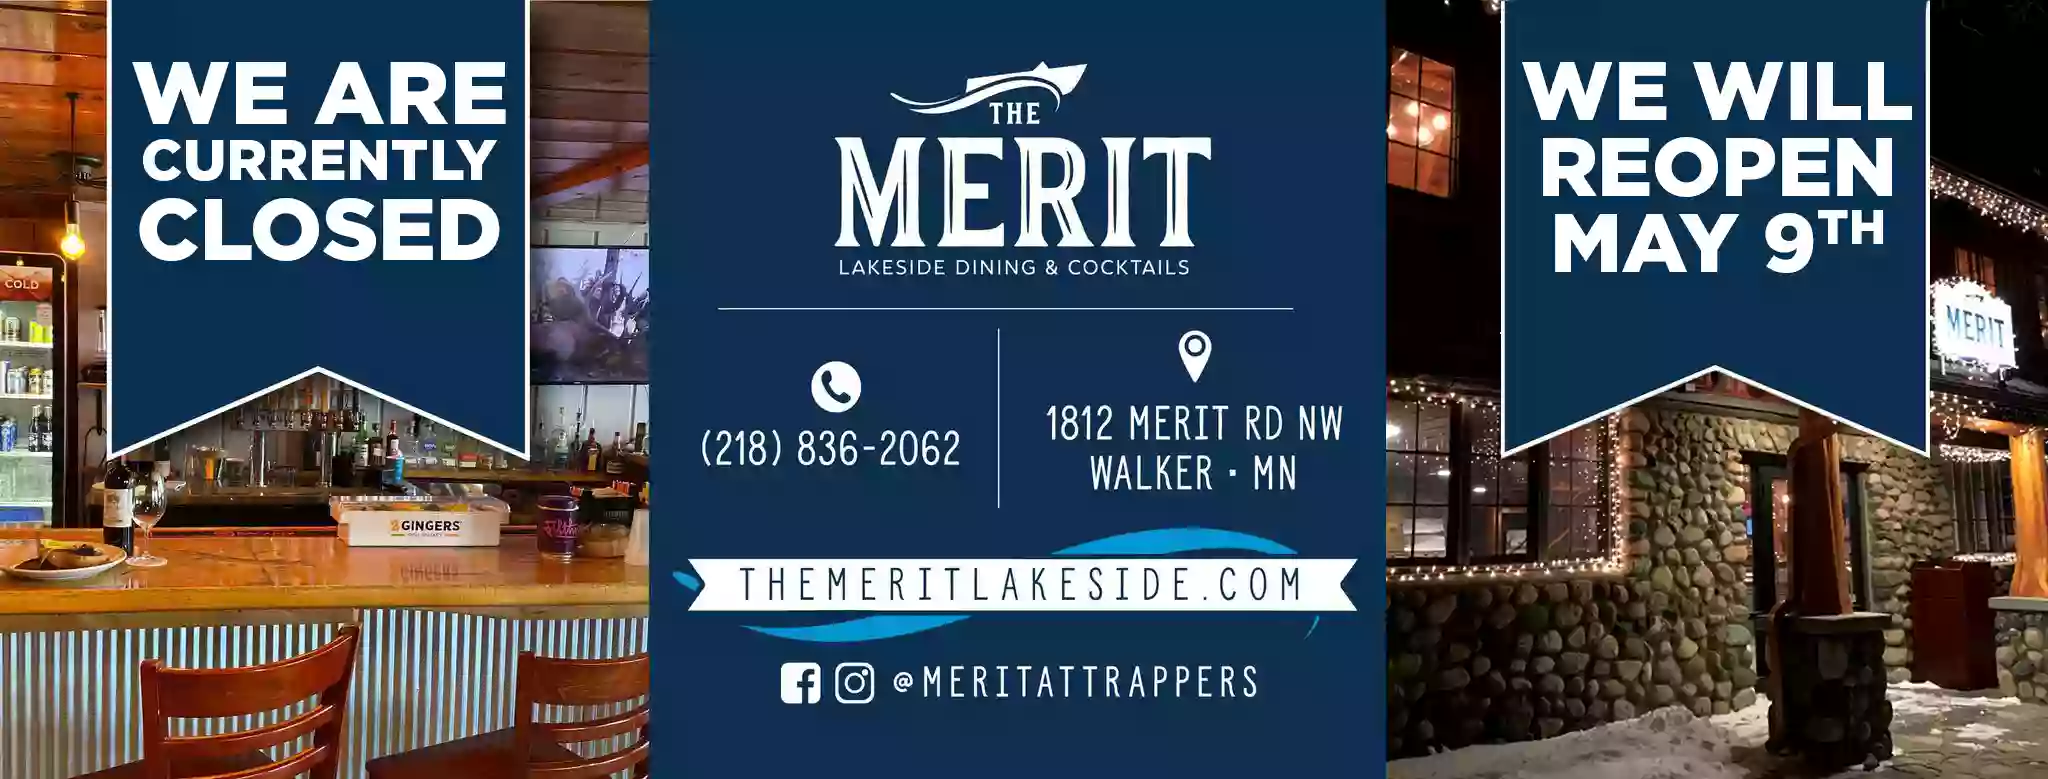 The Merit Lakeside Dining & Cocktails